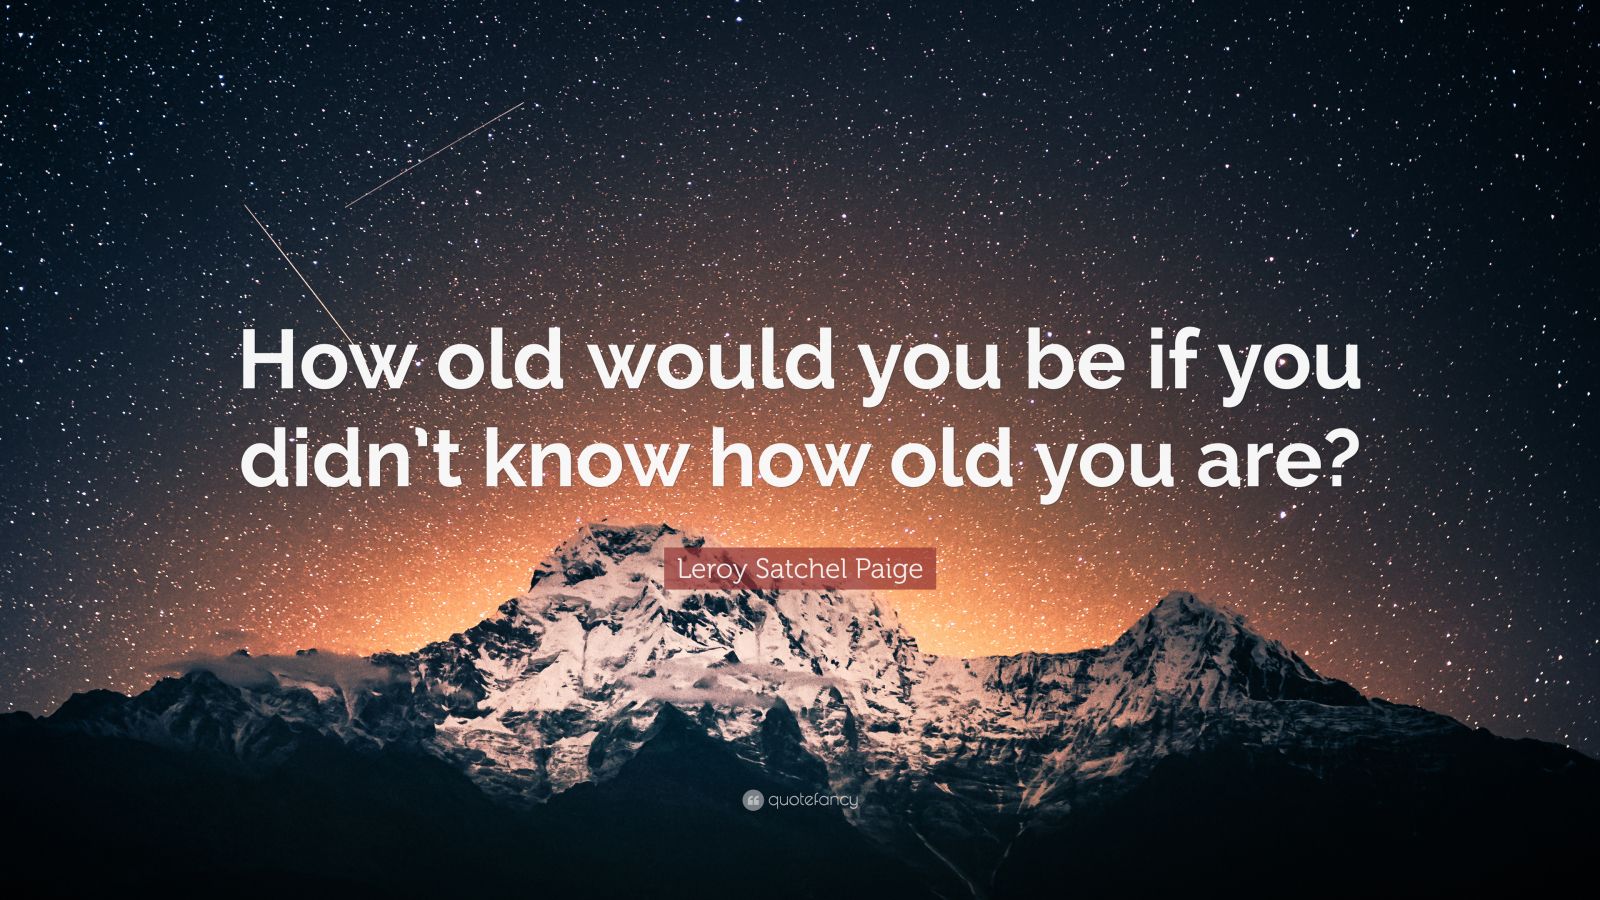 Leroy Satchel Paige Quote “How old would you be if you didn’t know how